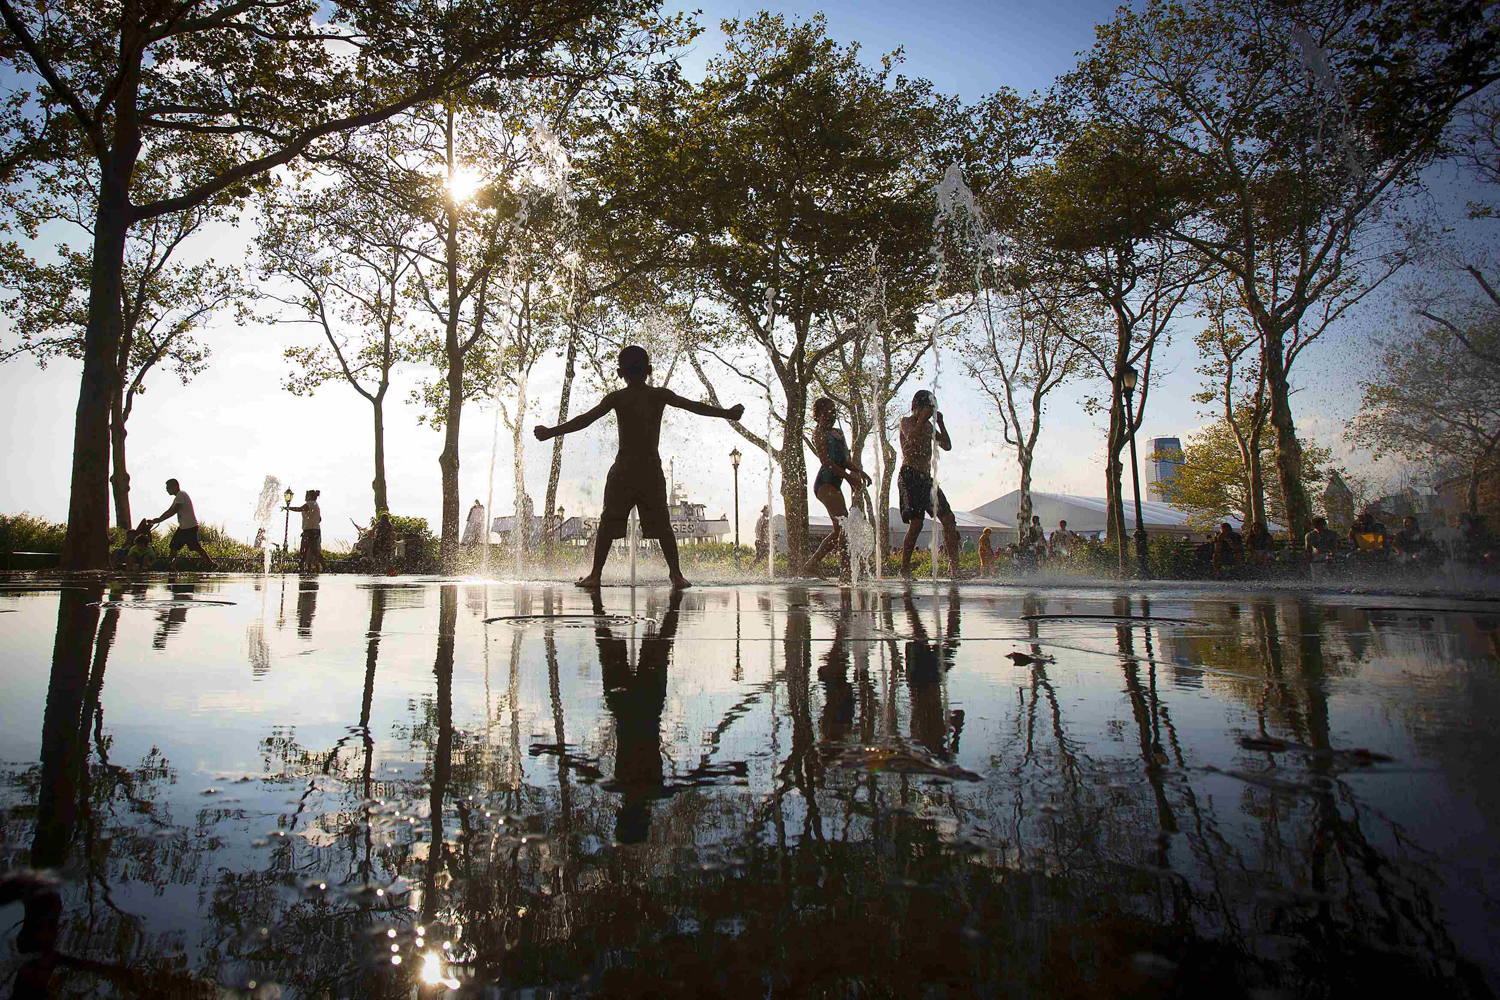 Children play in a fountain in the late afternoon sun in the Lower Manhattan borough of New York